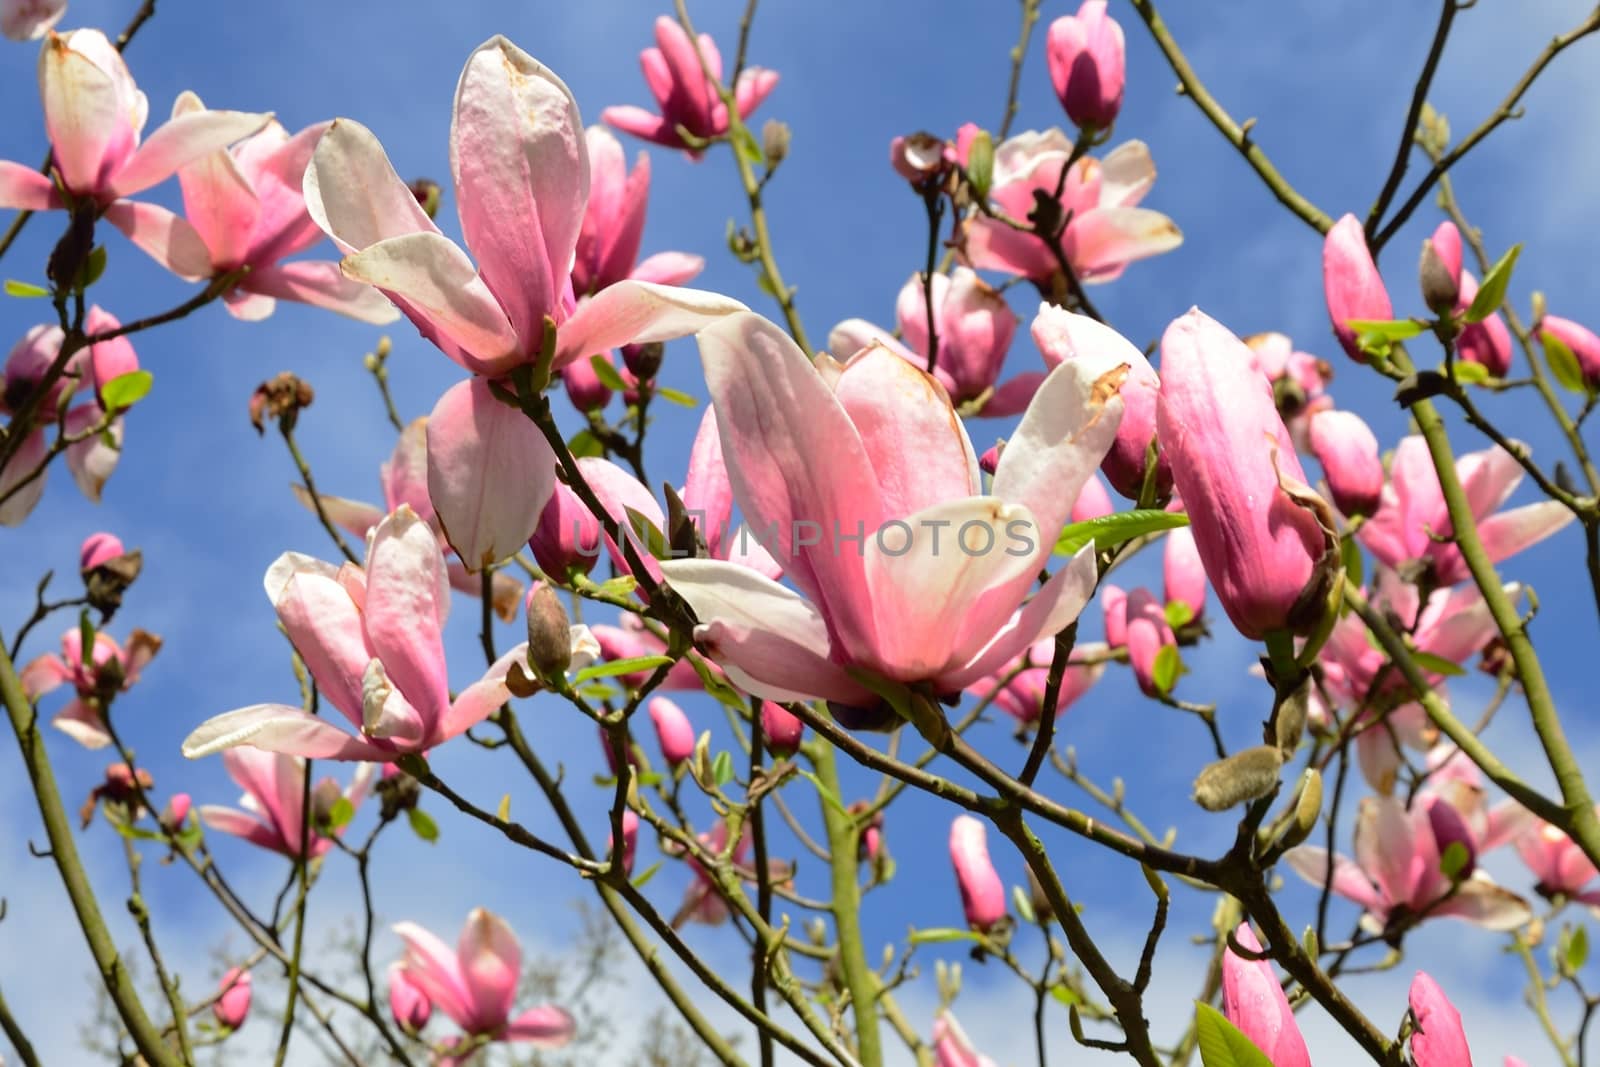 Magnolias with sky in background by pauws99